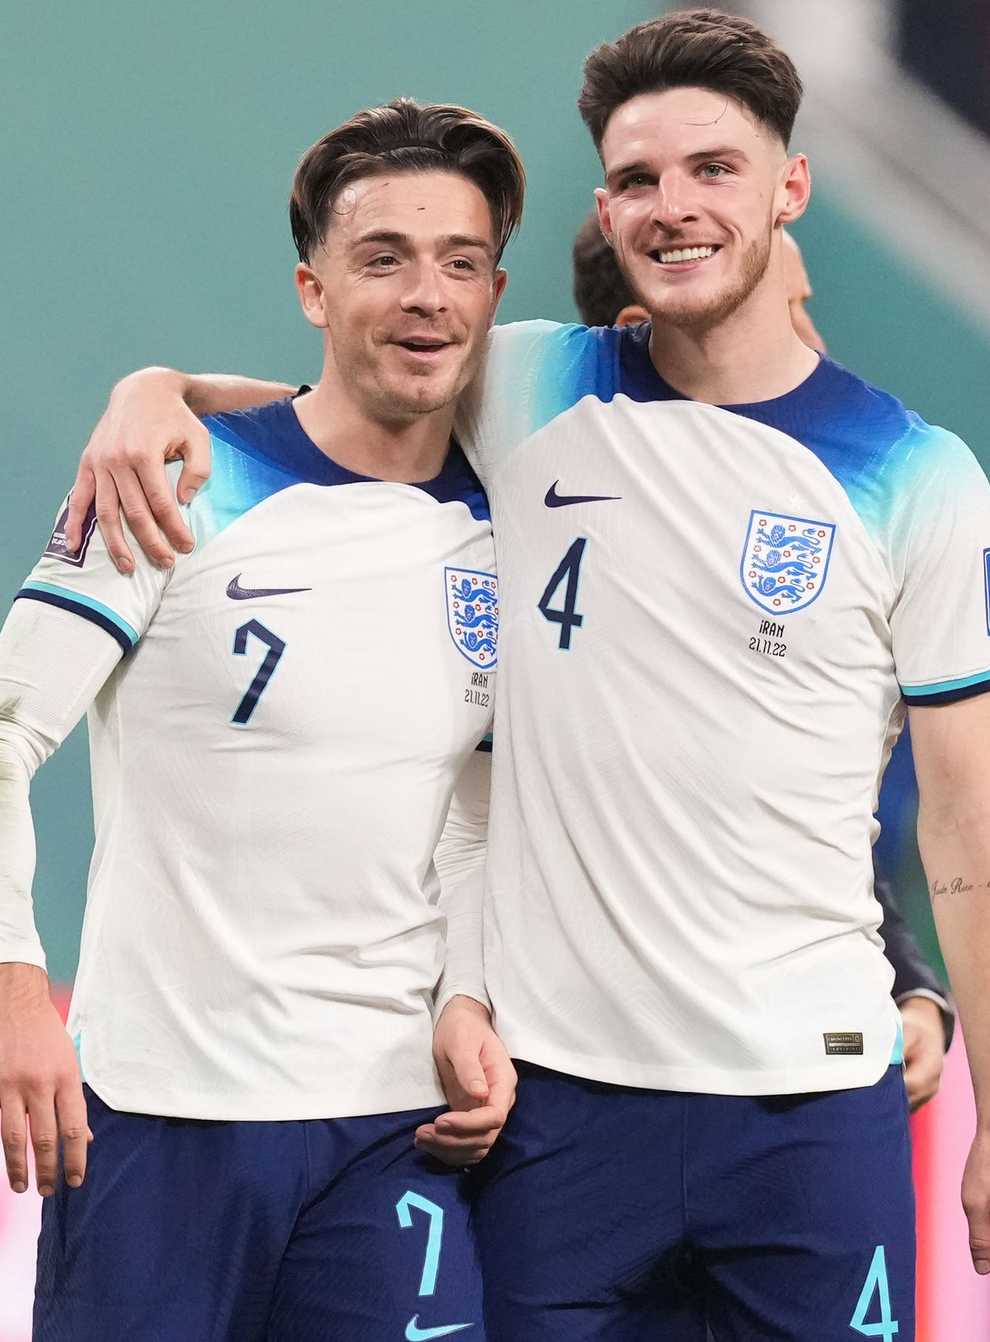 Jack Grealish (left) celebrates with Declan Rice after England’s win over Iran (Martin Rickett/PA)